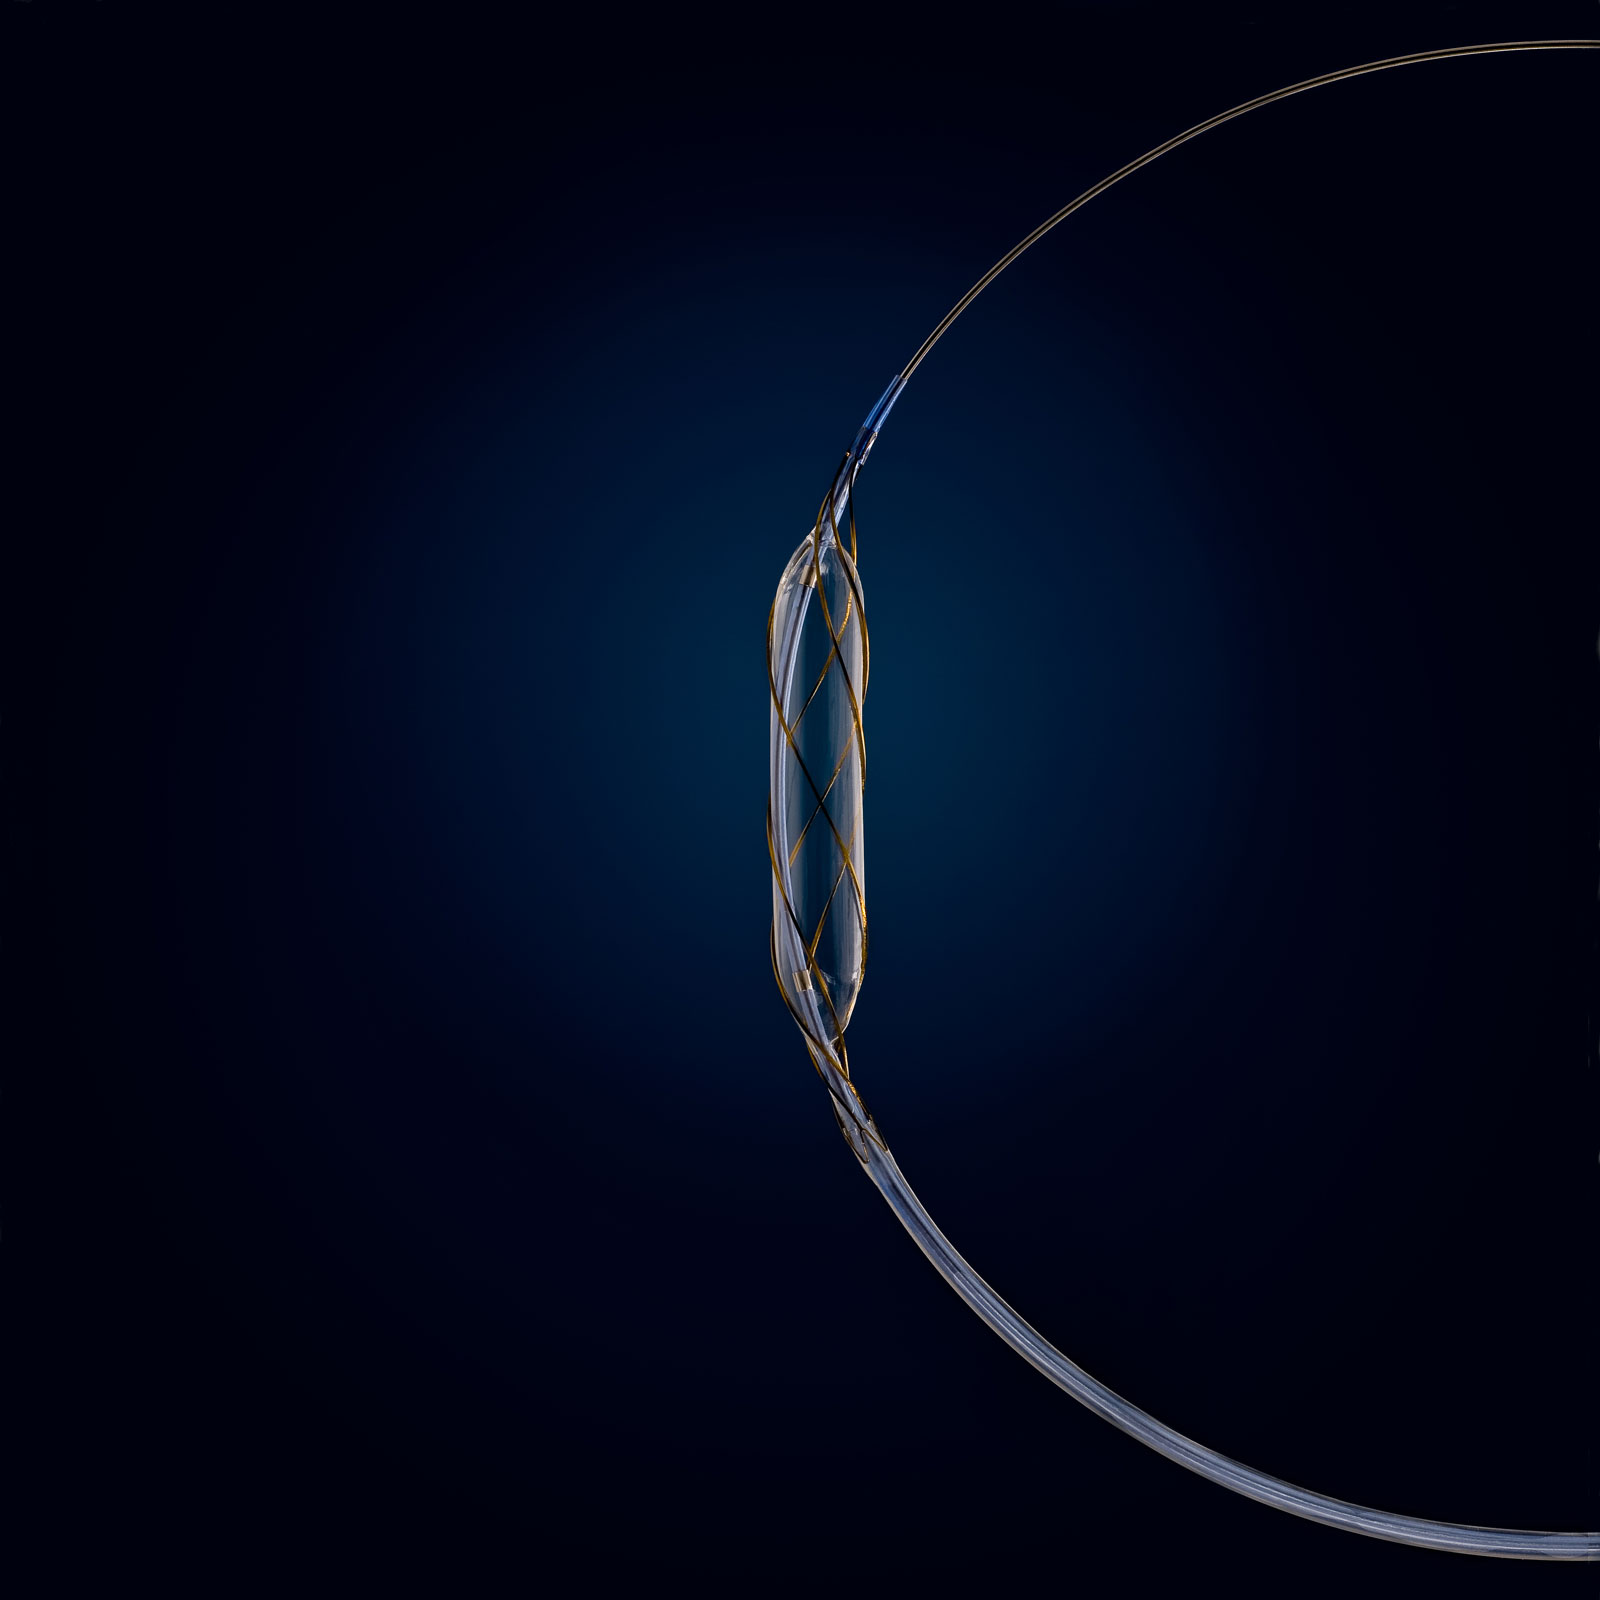 Image of a medical balloon catheter.